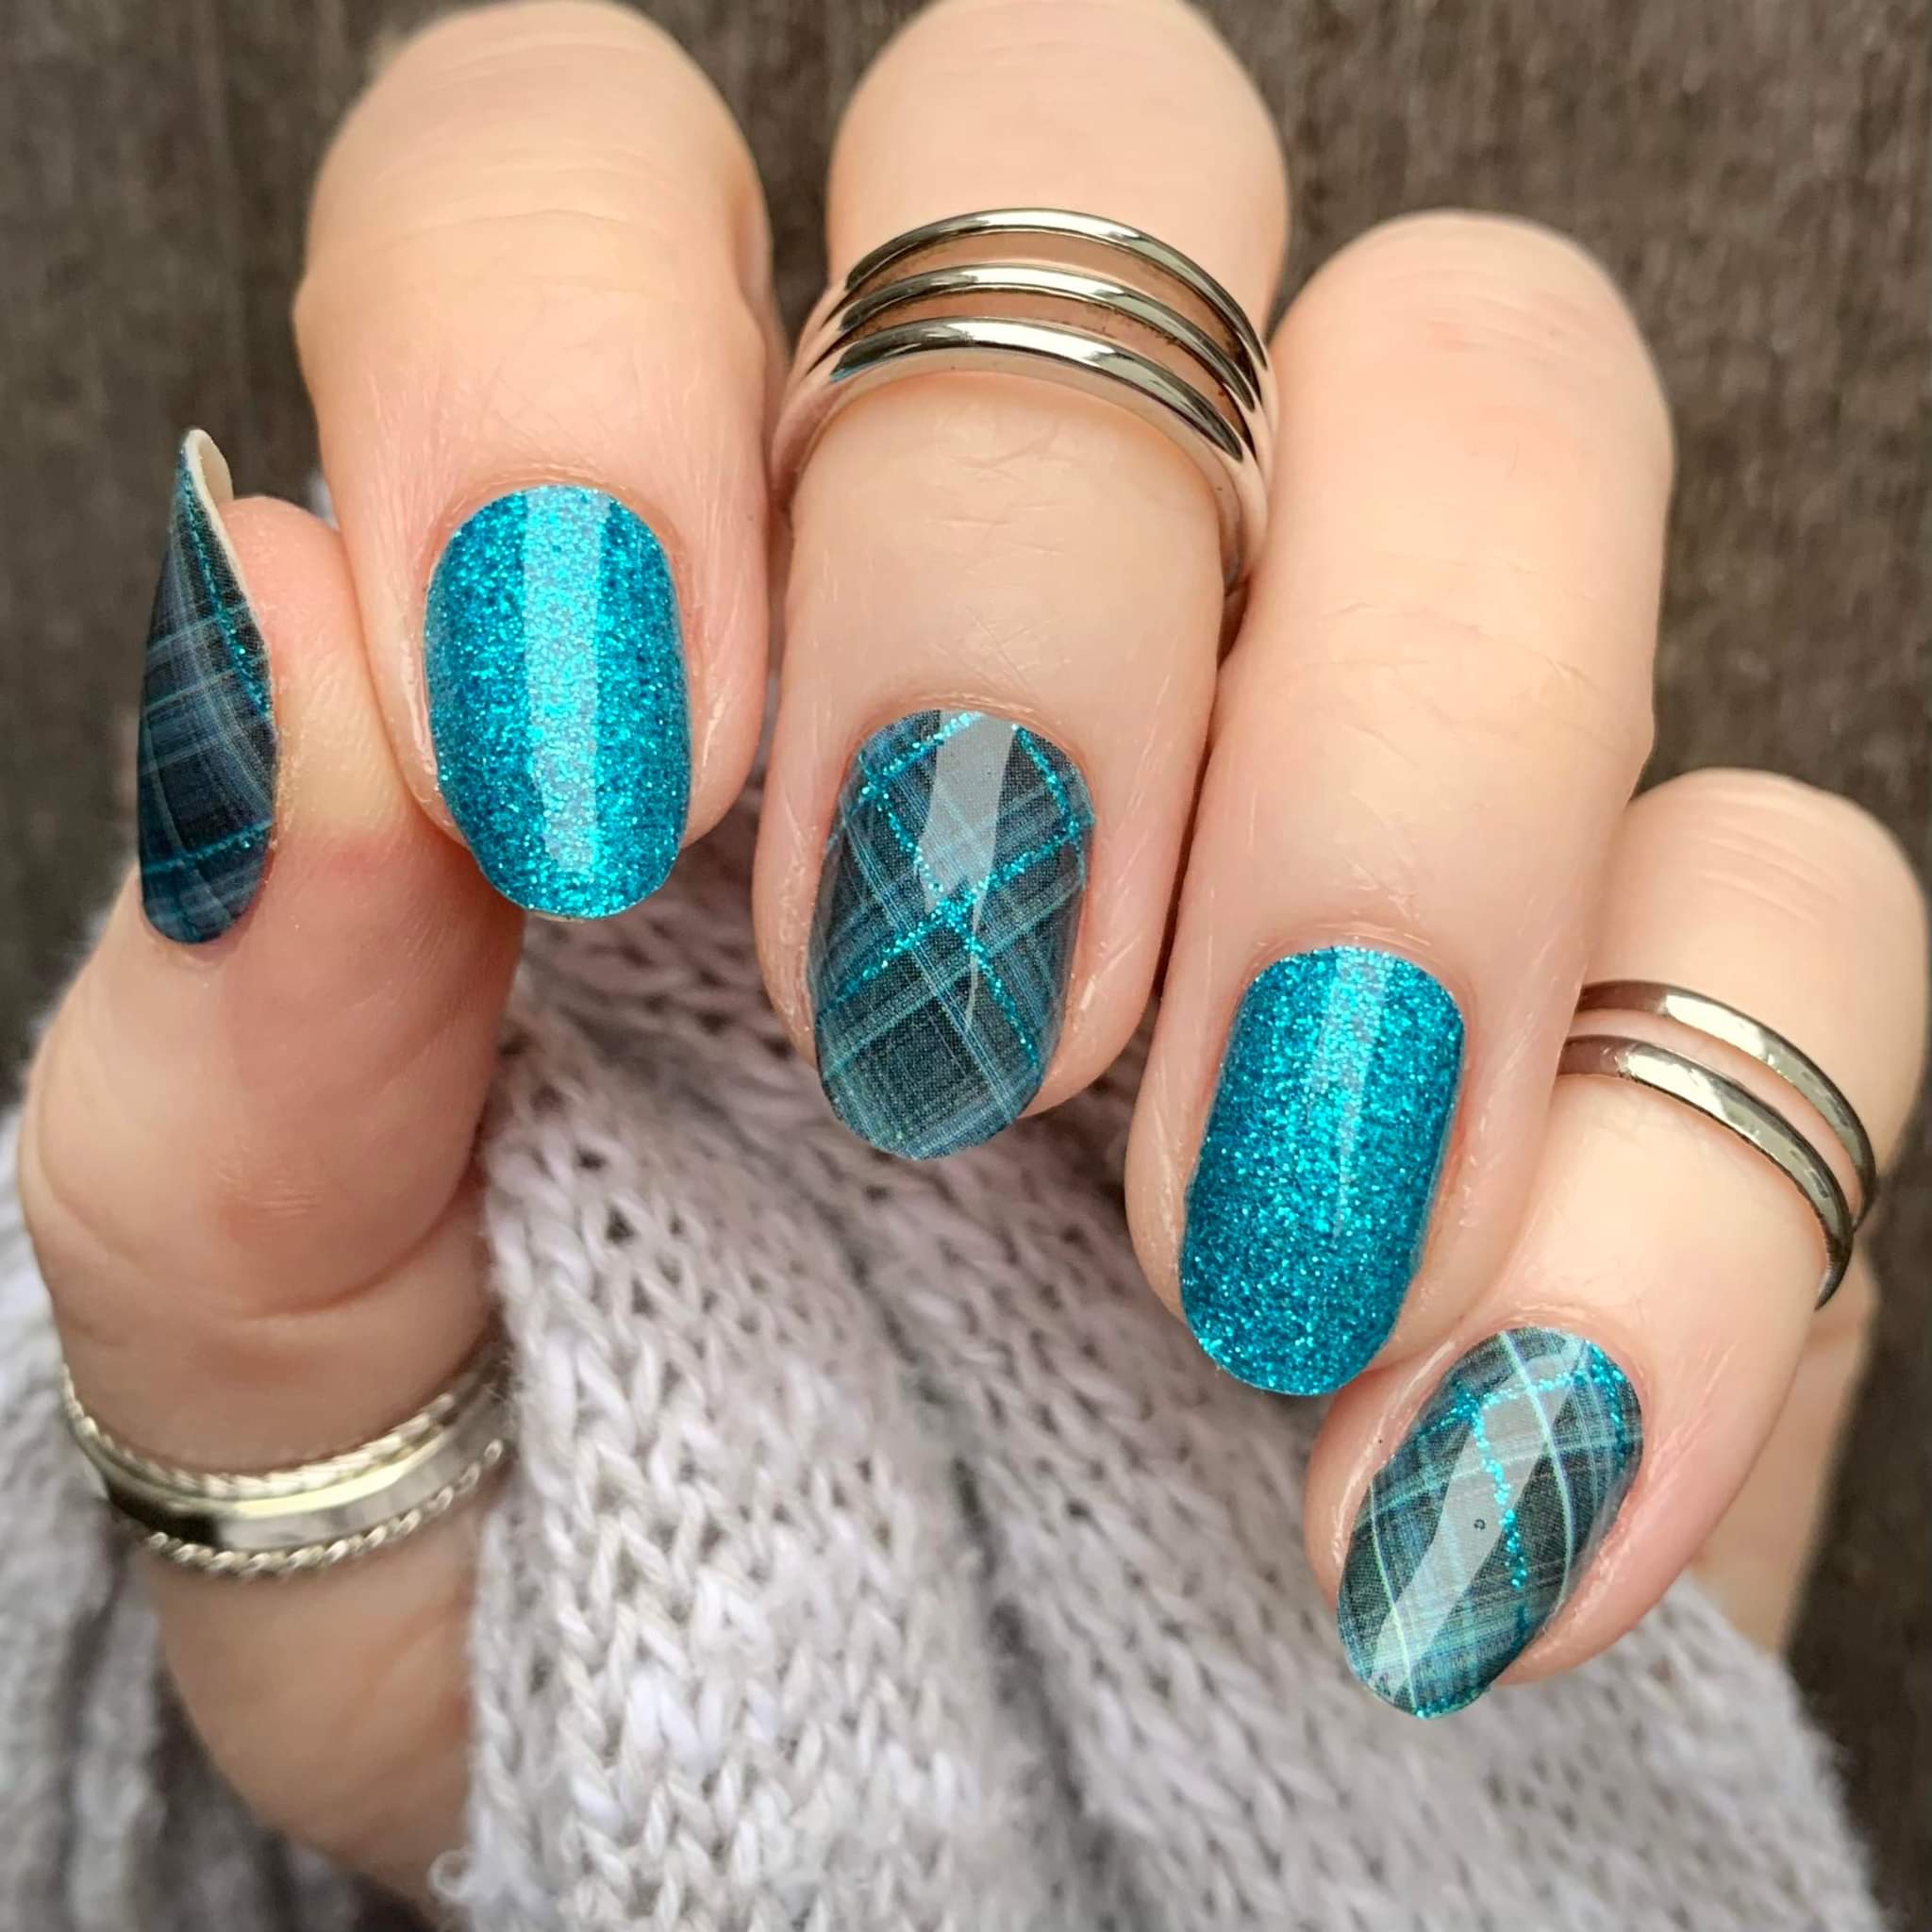 21 Teal Nail Designs We Can't Wait to Try | Turquoise nails, Teal nails, Teal  nail designs